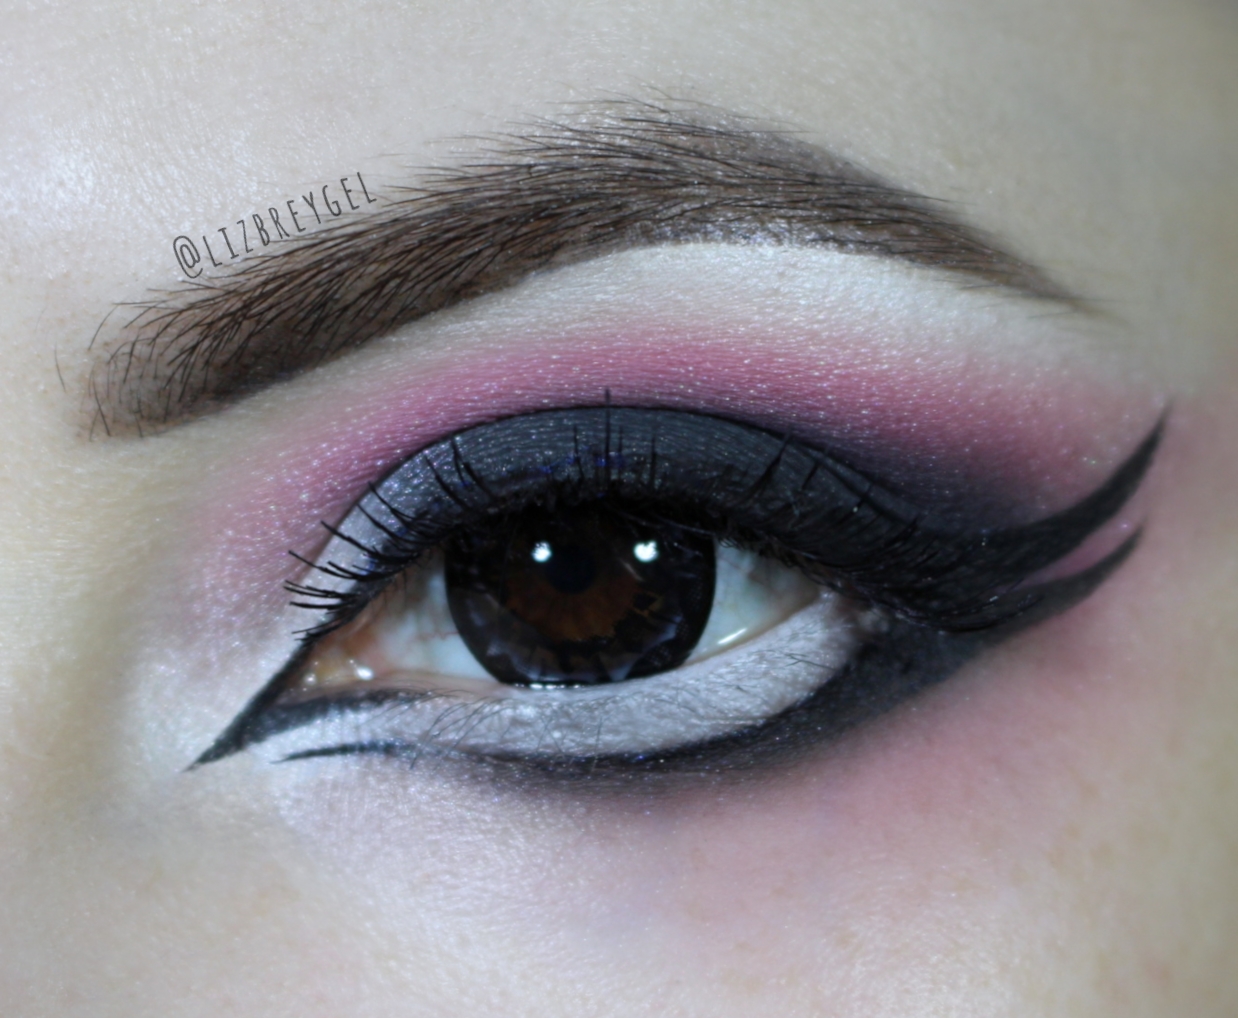 a close-up of a brown eye with dramatic black and pink makeup look inspired by Gothic Lolita subculture